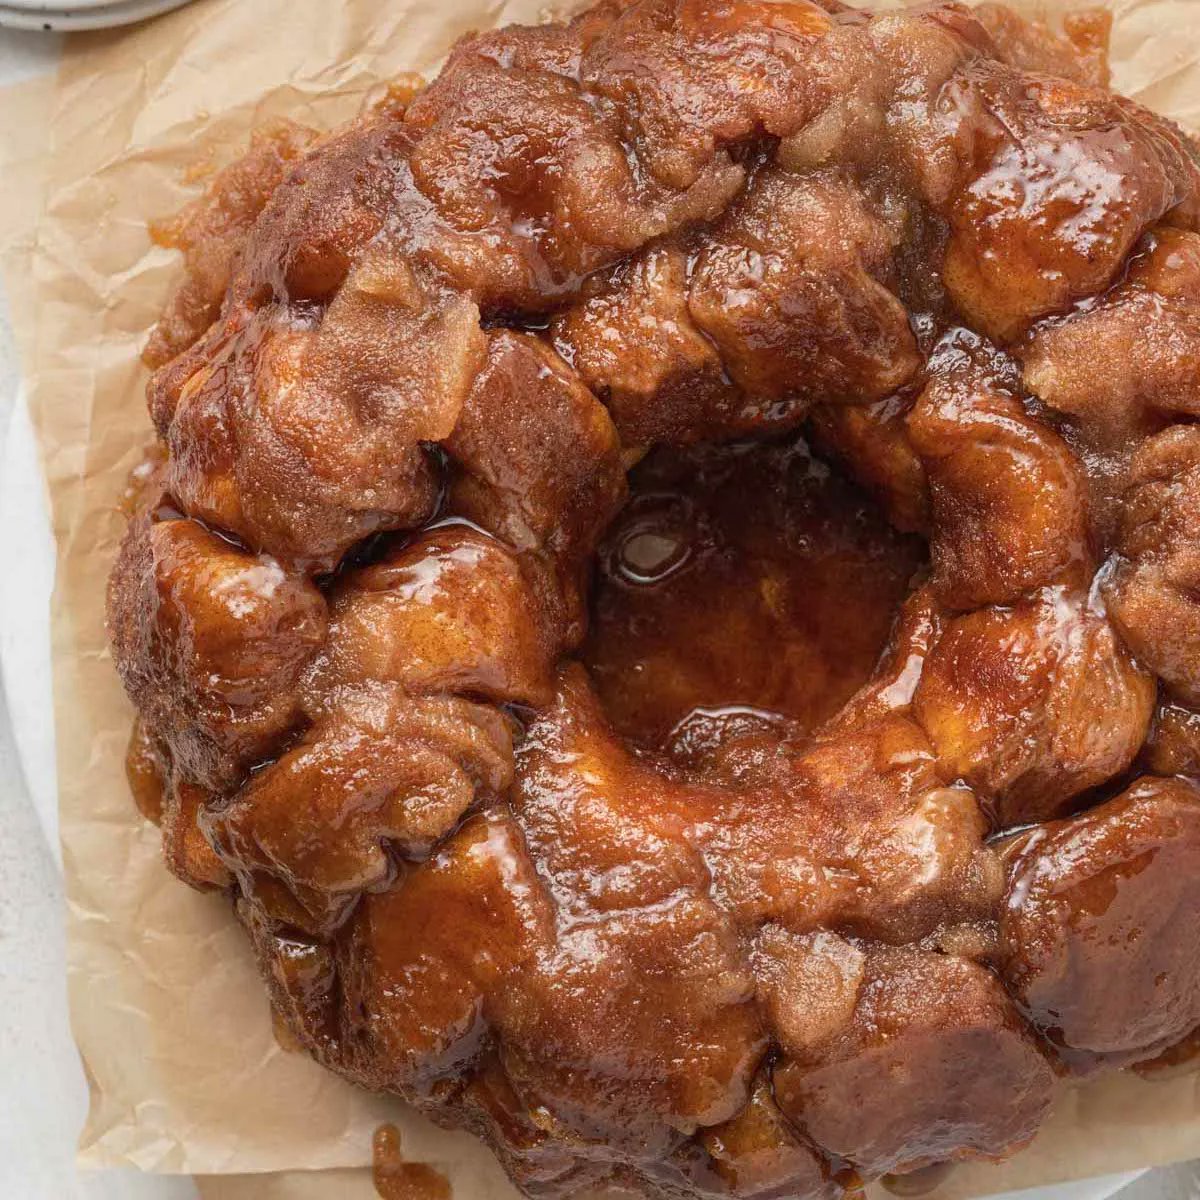 Monkey bread is a pull-apart bread that’s coated in a gooey caramel sauce. Instead of using canned biscuits, I made the monkey bread dough completely from scratch! #monkeybread #pullapartbread #baking #caramelsauce buff.ly/3mMOitz